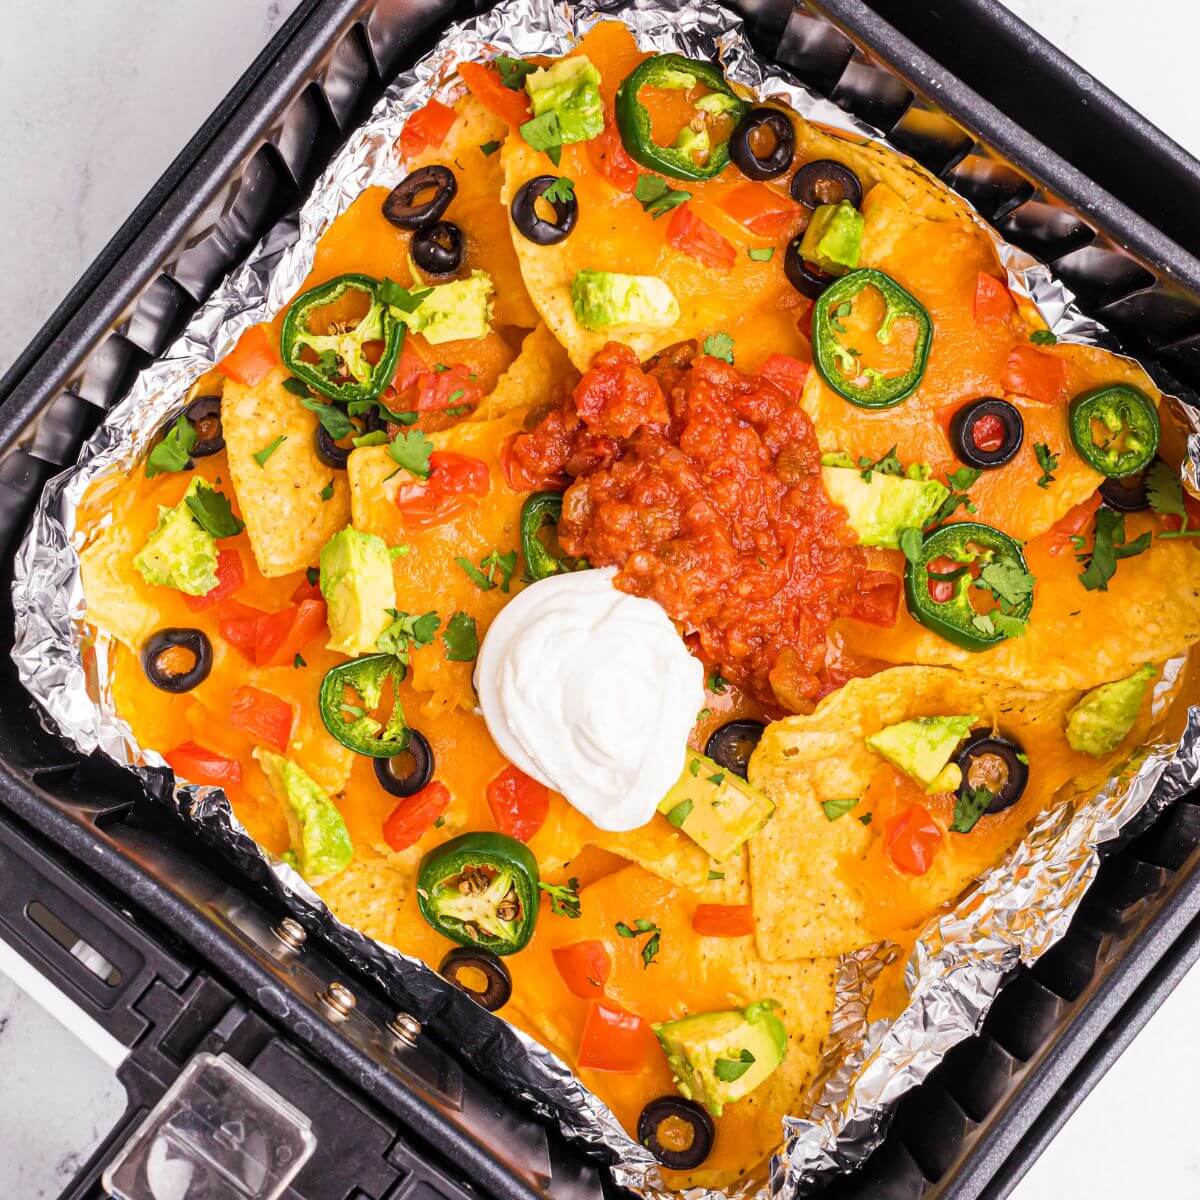 Crispy nachos in an air fryer basket topped with cheese, sour cream and salsa.